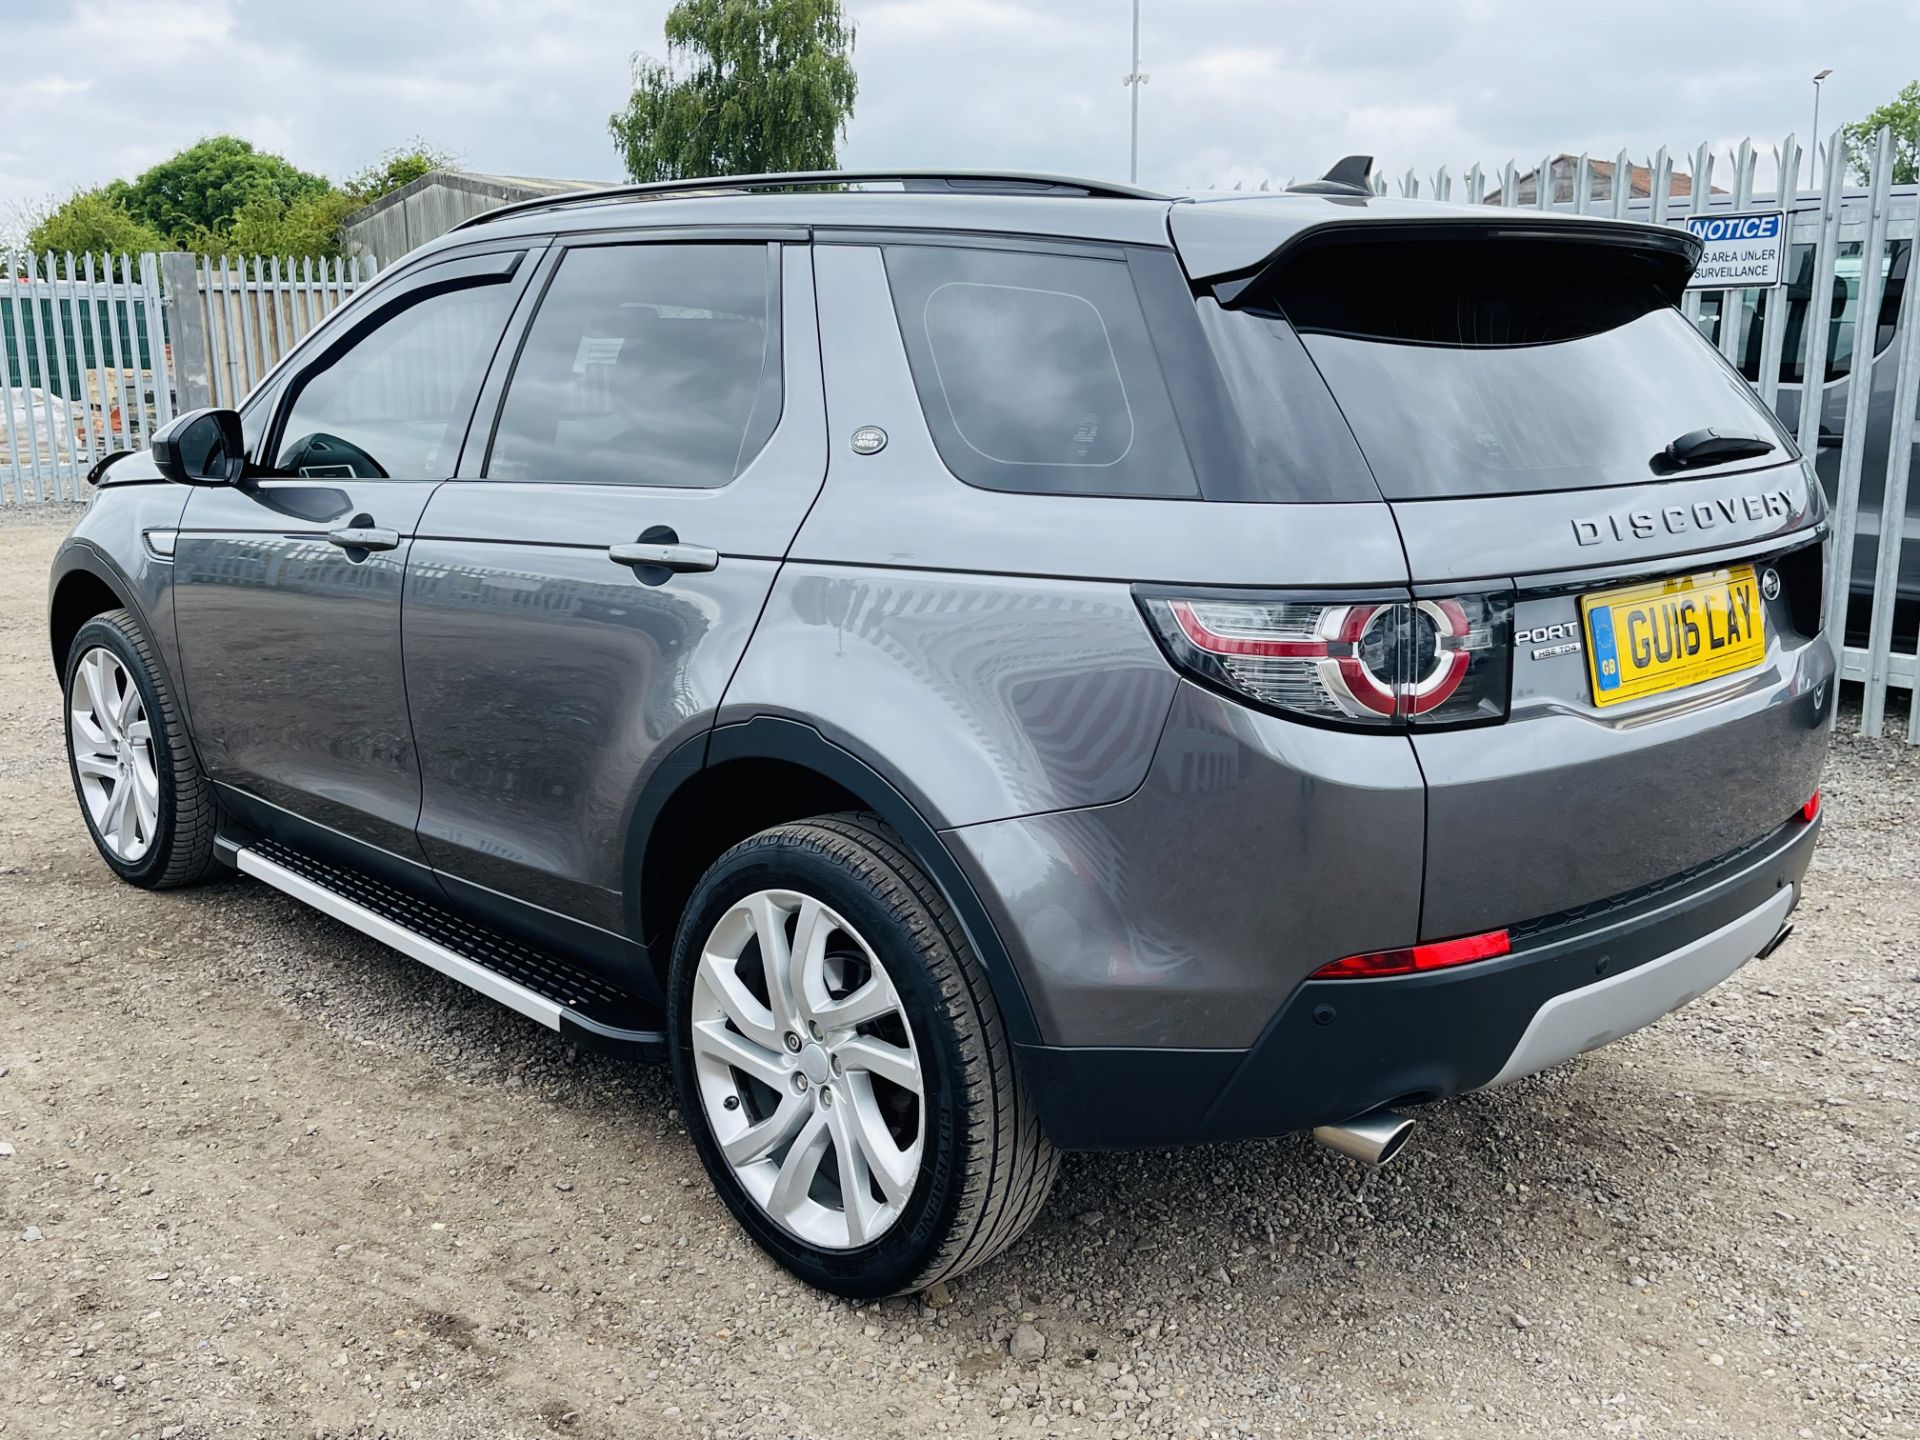 ** ON SALE **Land Rover Discovery sport 2.0 TD4 HSE 2016 '16 Reg' 7 seats - Sat Nav - Euro 6 - - Image 16 of 35